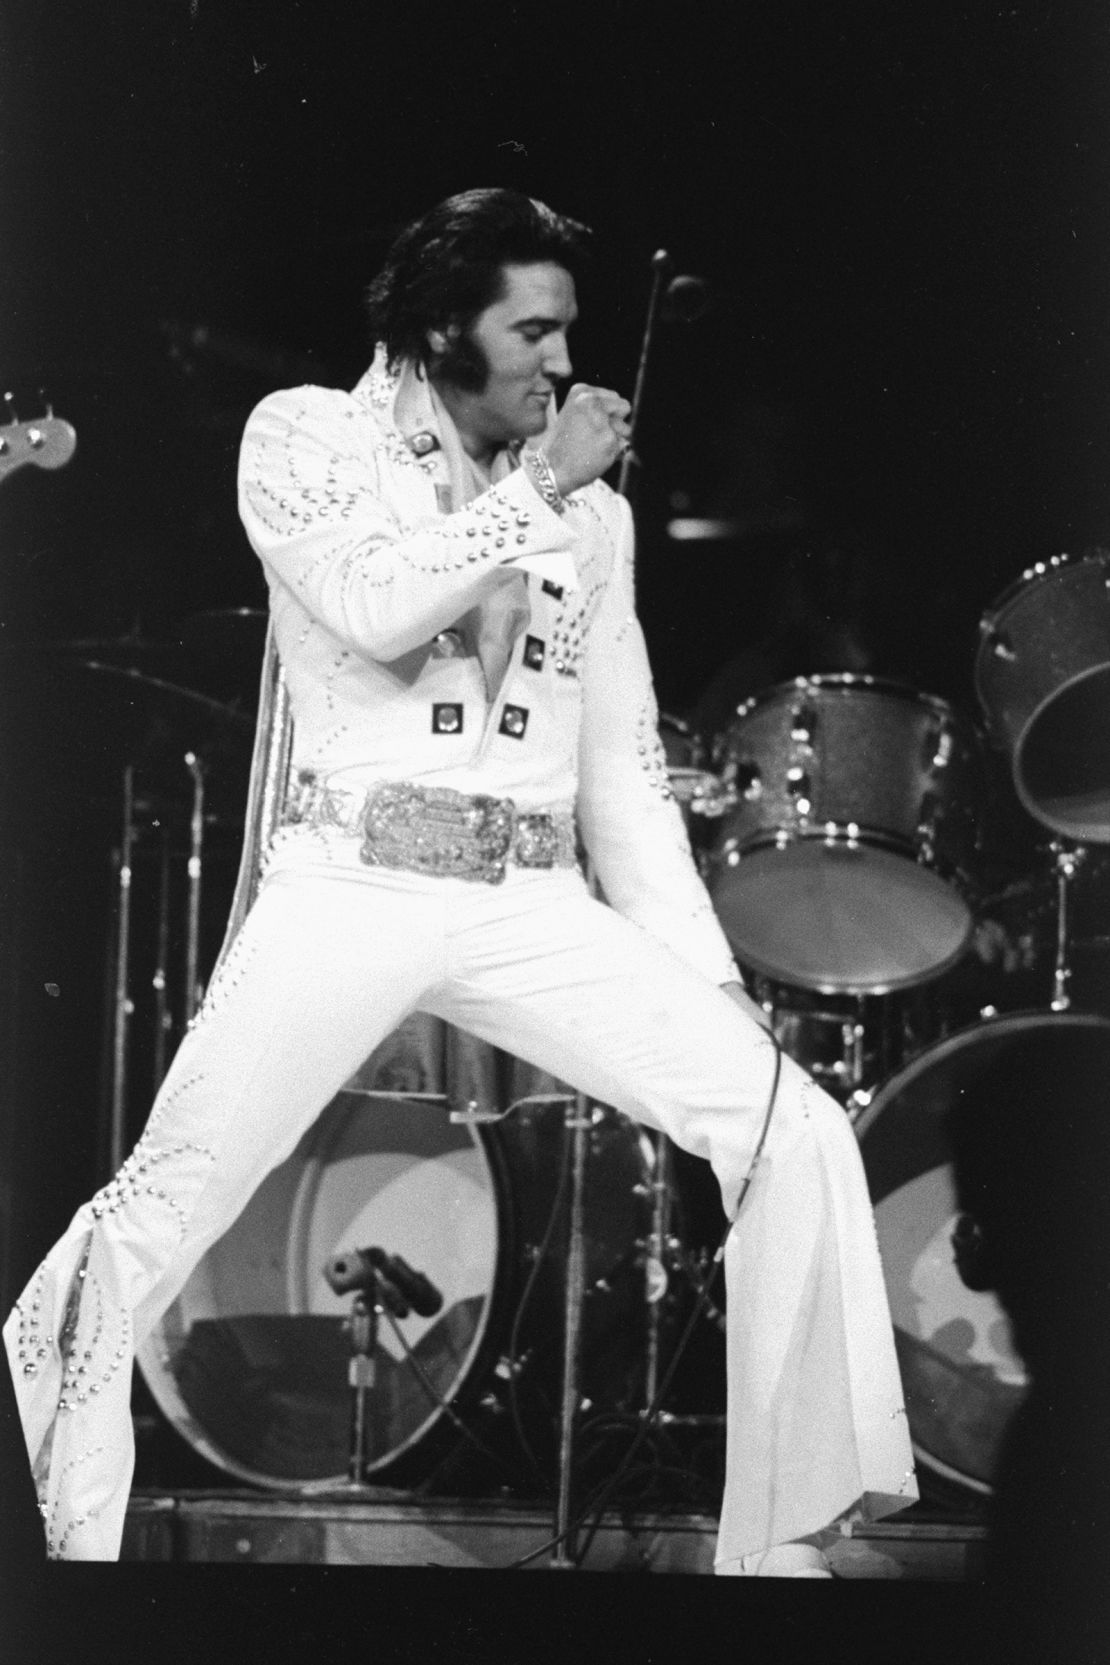 Remember when Elvis Presley's white jumpsuits changed how men